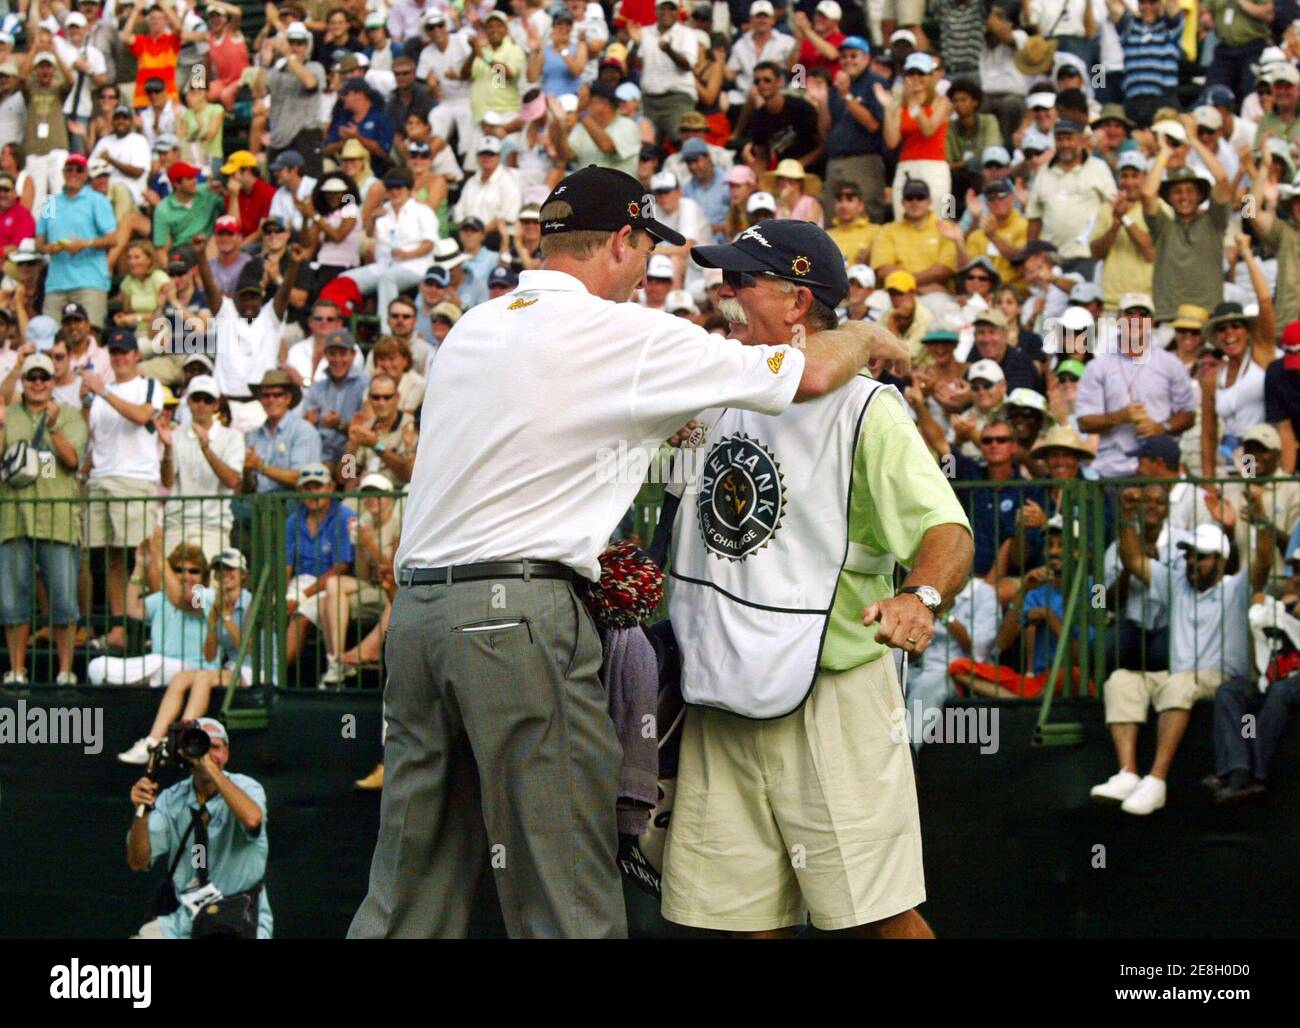 Jim Furyk (L) of the U.S. and his caddie Mike Cowan celebrate after Furyk won the Sun City Golf Challenge in Sun City, South Africa December 4, 2005. Furyk chipped in on the second extra hole of a sudden-death playoff to win the 25th Sun City Golf Challenge on Sunday. Furyk's birdie from 15-feet from the back of the par-four 18th green beat off Briton Darren Clarke and Australia's Adam Scott for the $1.2 million first prize. REUTERS/Juda Ngwenya Stock Photo